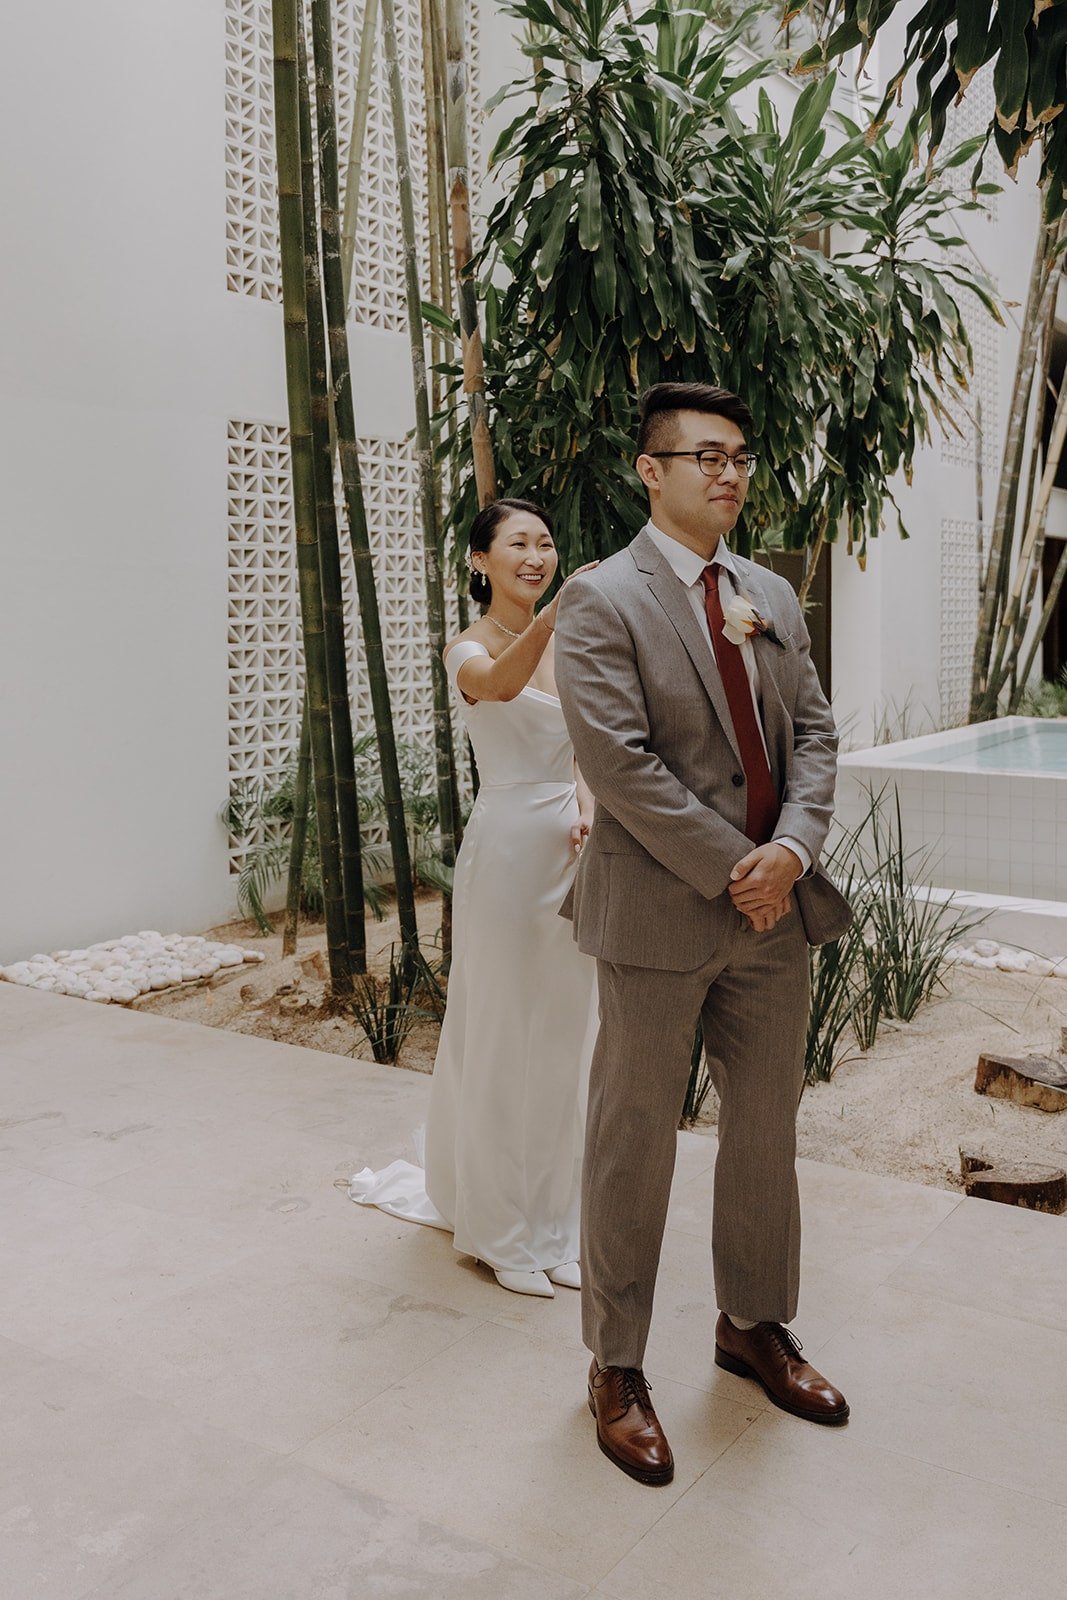 Bride and groom first look at Mexico resort wedding